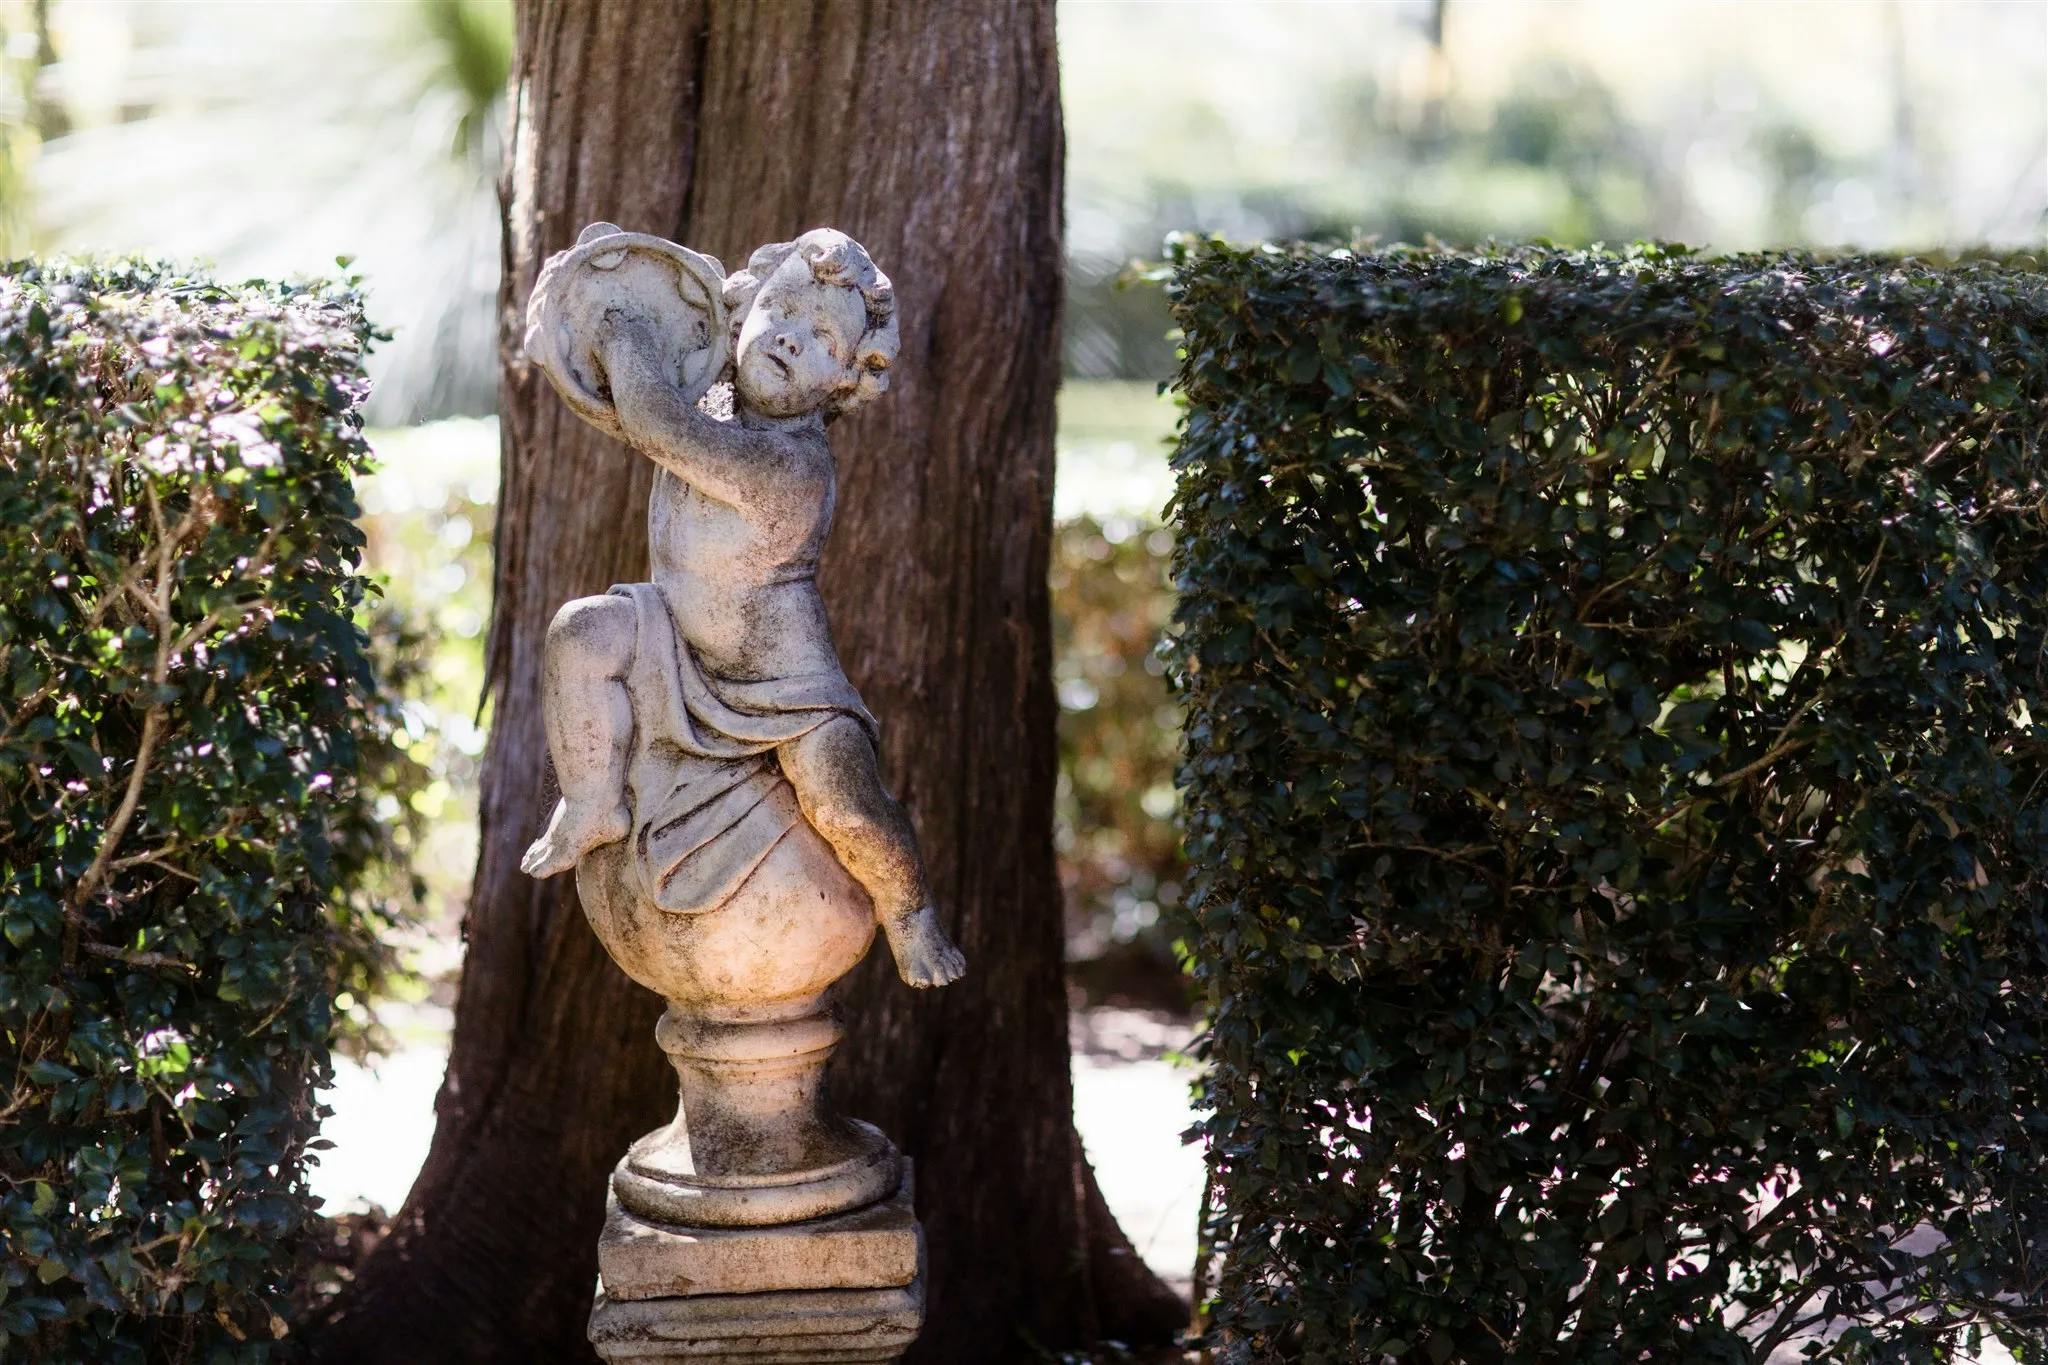 A stone cherub statue is perched on a pedestal, partially surrounded by neatly trimmed hedges. It is holding a disc above its head and leaning against a large tree trunk in the background, with soft sunlight filtering through.